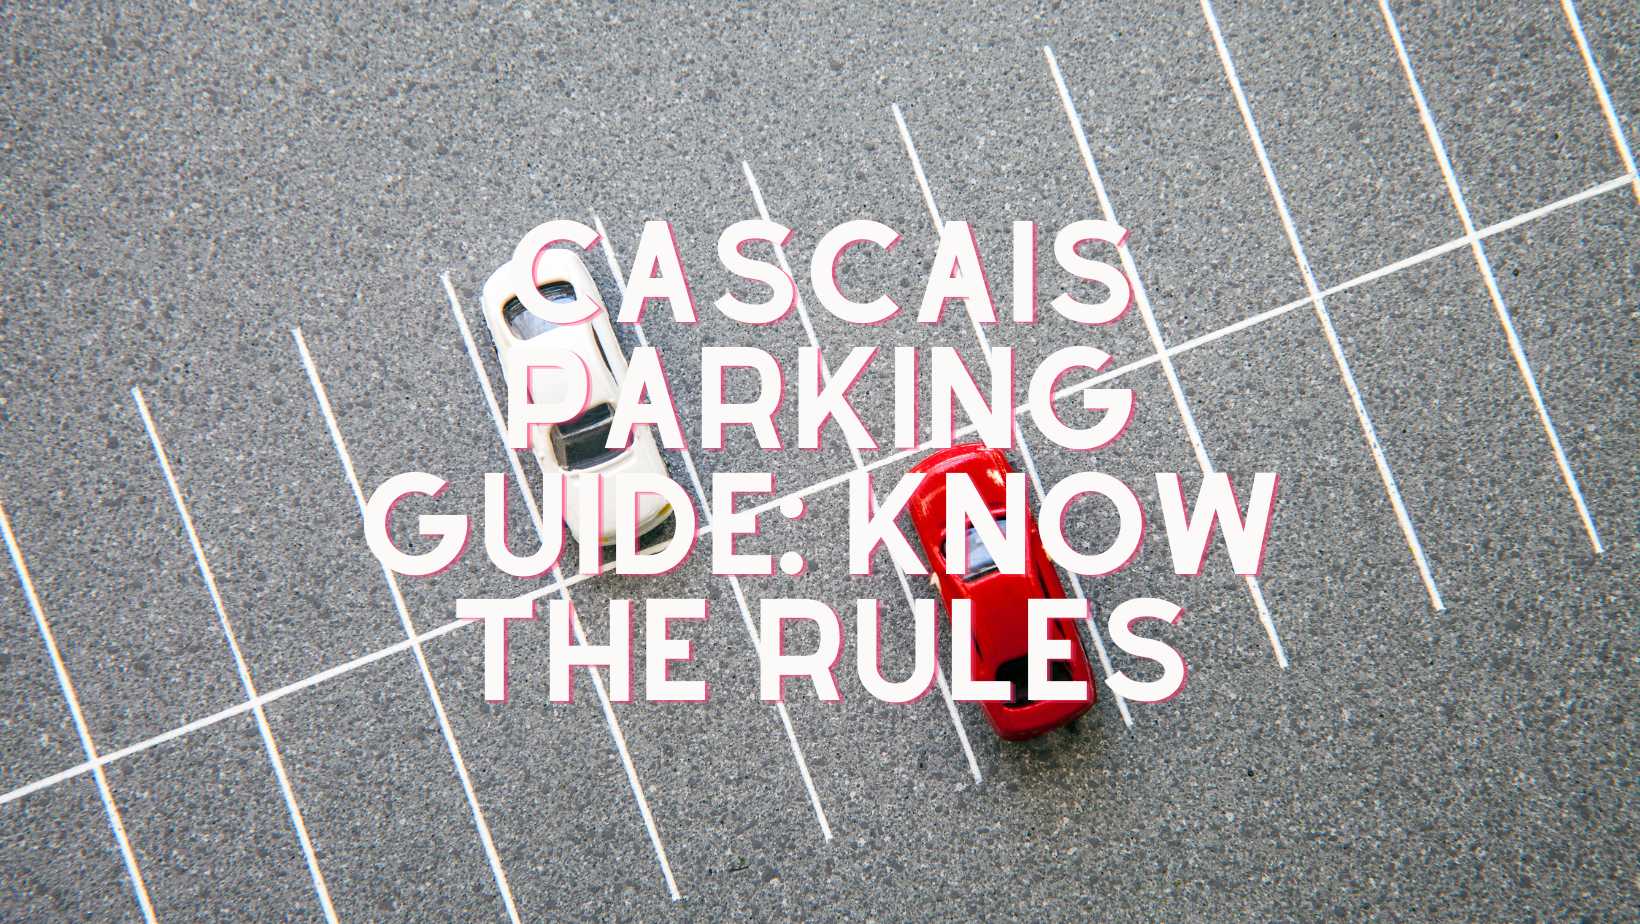 Cascais Parking Guide Know the Rules